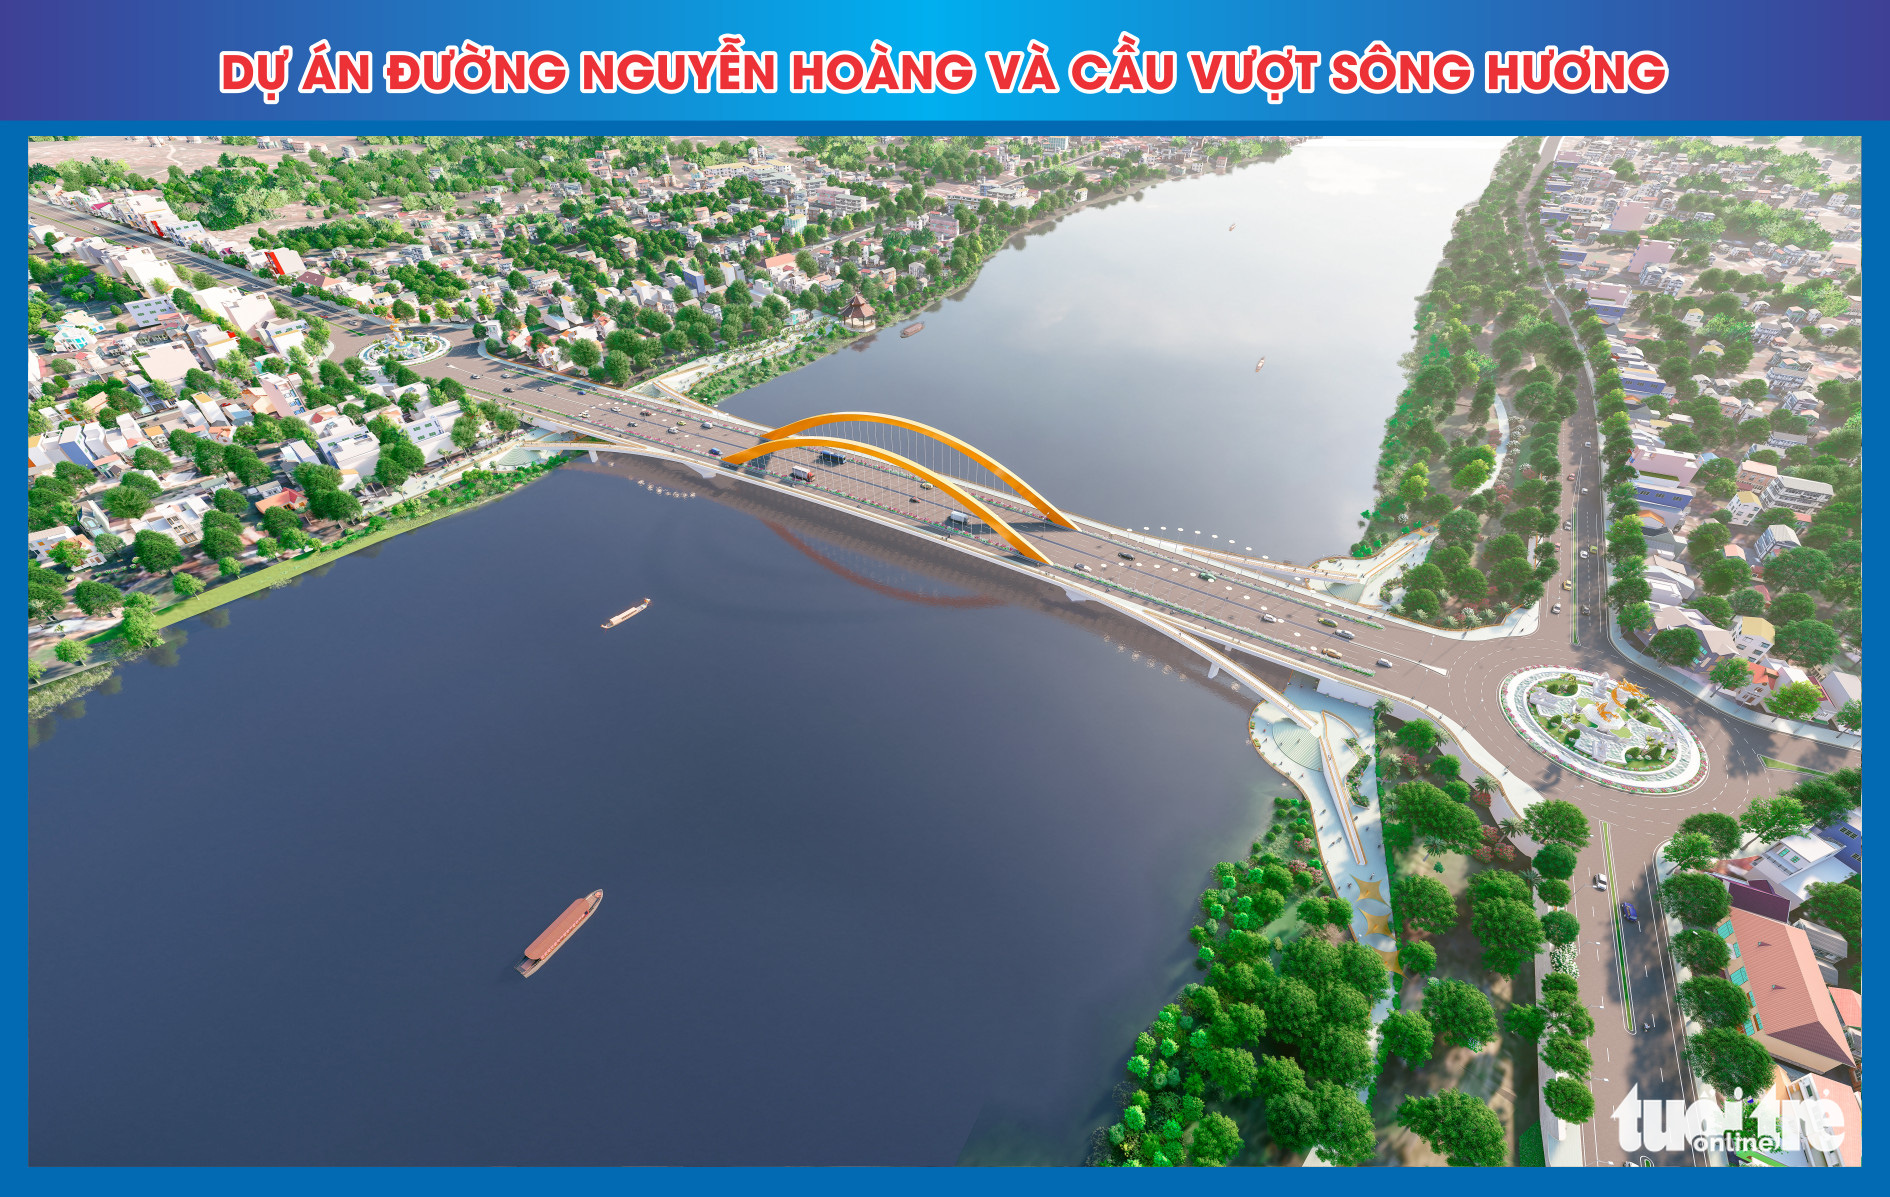 Vietnamese central province builds new $80mn bridge over Perfume River